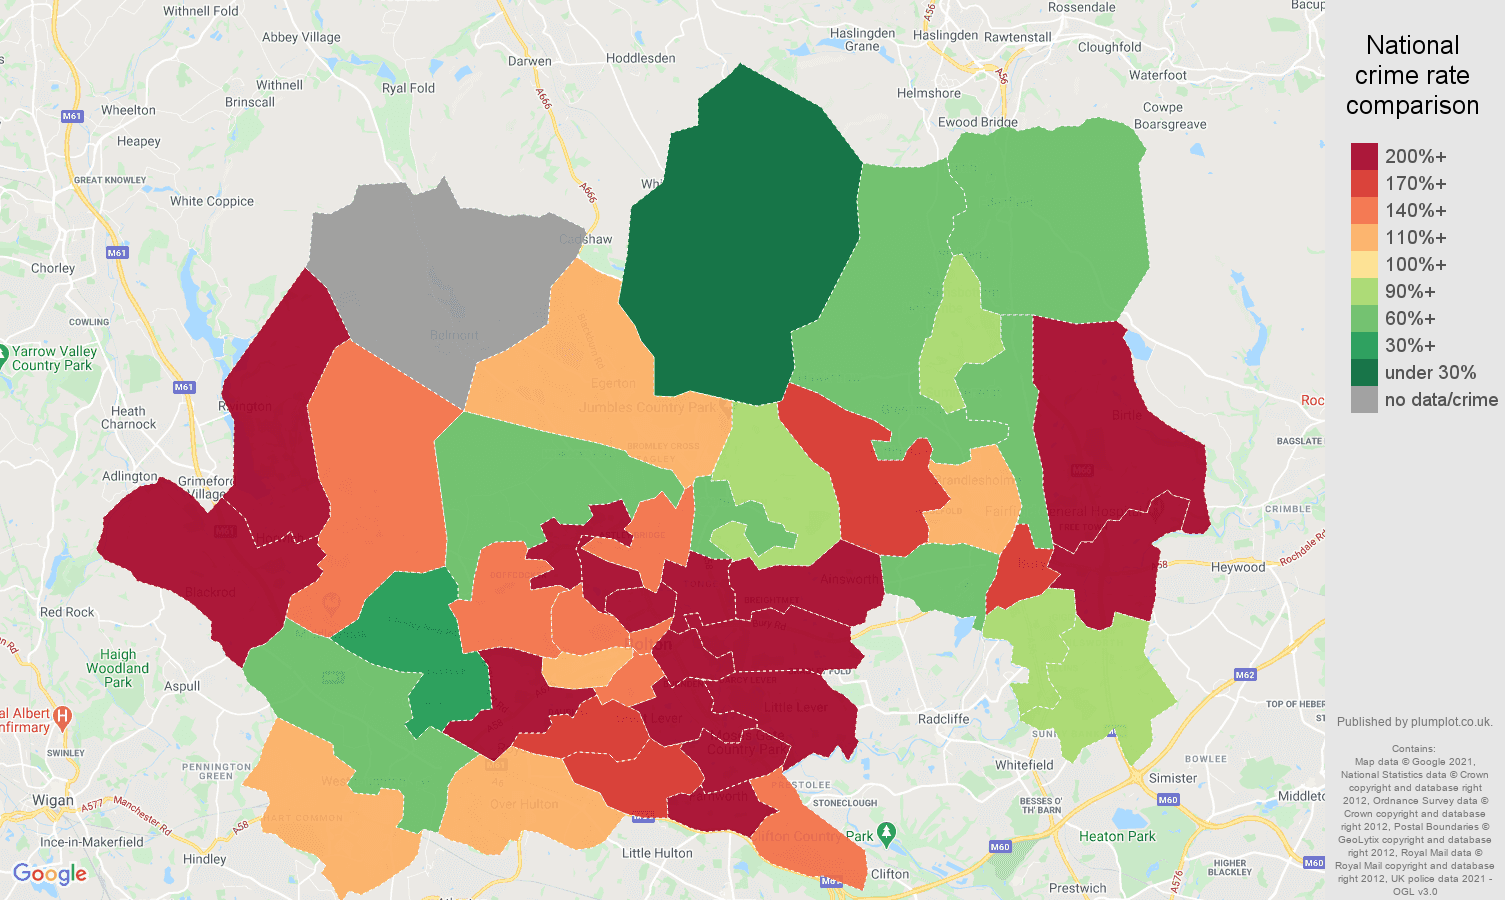 Bolton other crime rate comparison map